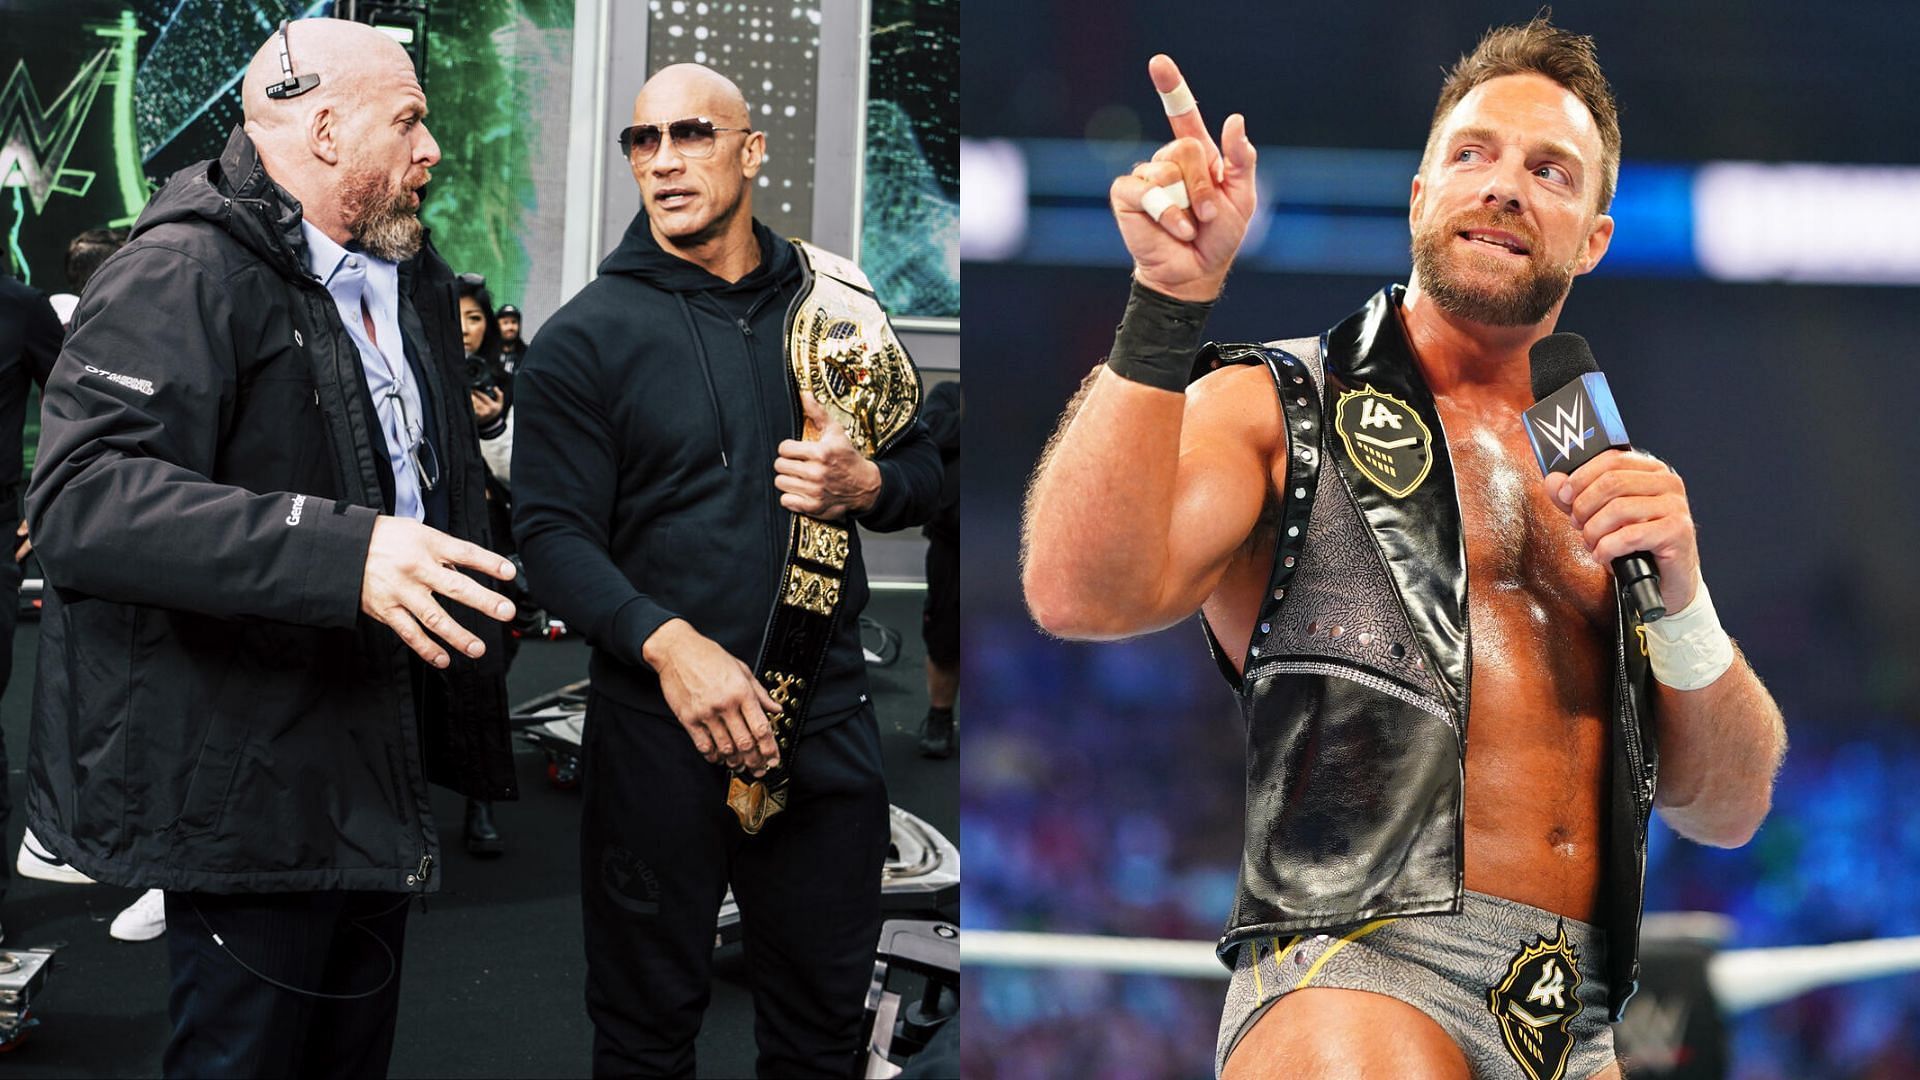 From left to right: Paul &quot;Triple H&quot; Levesque, Dwayne &quot;The Rock&quot; Johnson and LA Knight (Credit: WWE)